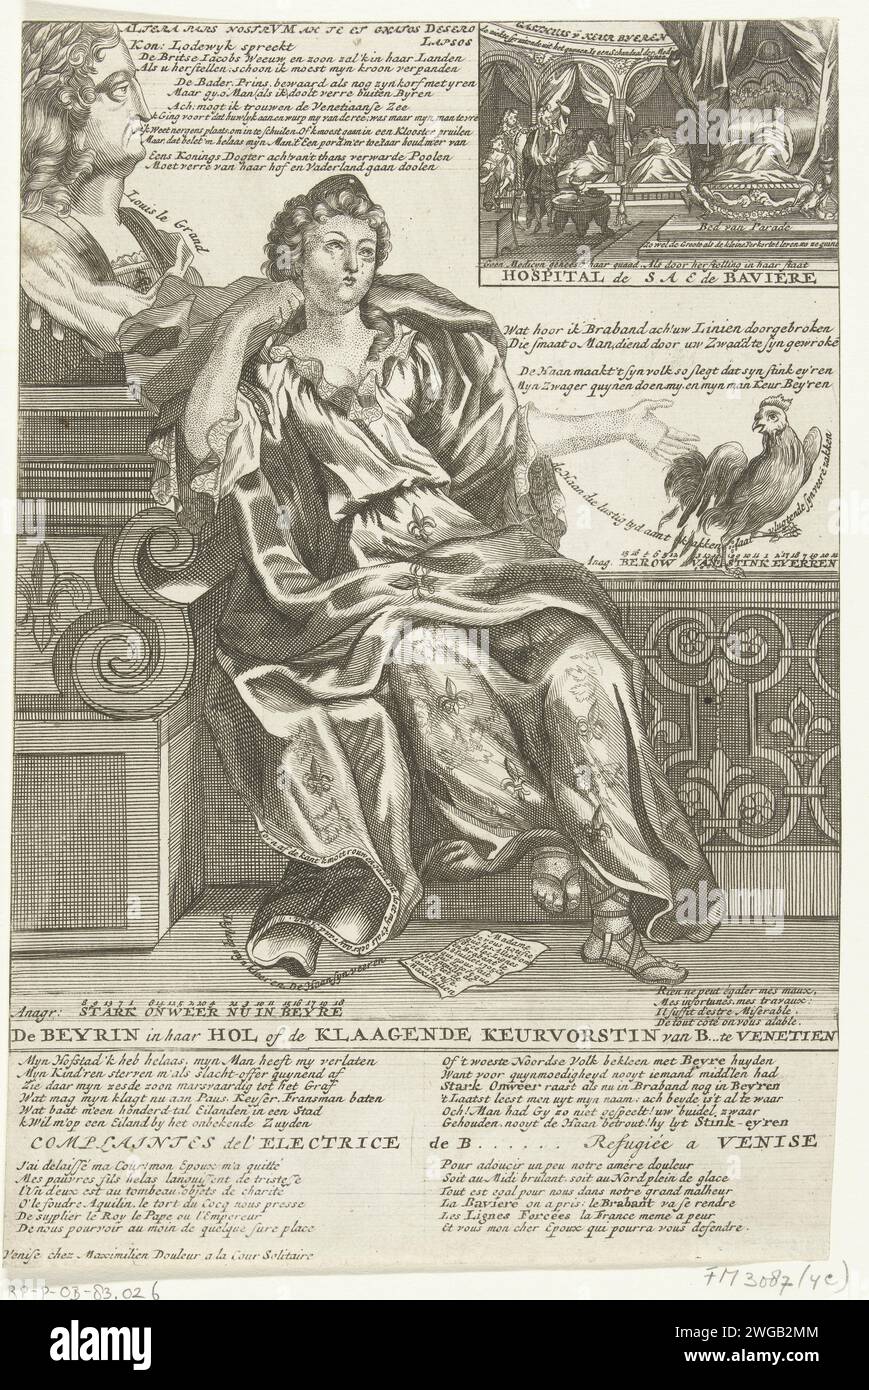 Complaint from the Elector of Bavaria, 1705, 1705 - 1706 print Complaint from Theresia Kunigunde Sobieska, Elector of Bavaria (the wife of Maximilian II Emanuel, Elector of Bavaria), 1705. On the left a large bust of King Louis XIV. Verses in Dutch and French in the record. Part of a series of 7 cartoons on the French and allies from the year 1705. print maker: Northern Netherlandspublisher: Amsterdam paper etching / engraving political caricatures and satires Venice Stock Photo